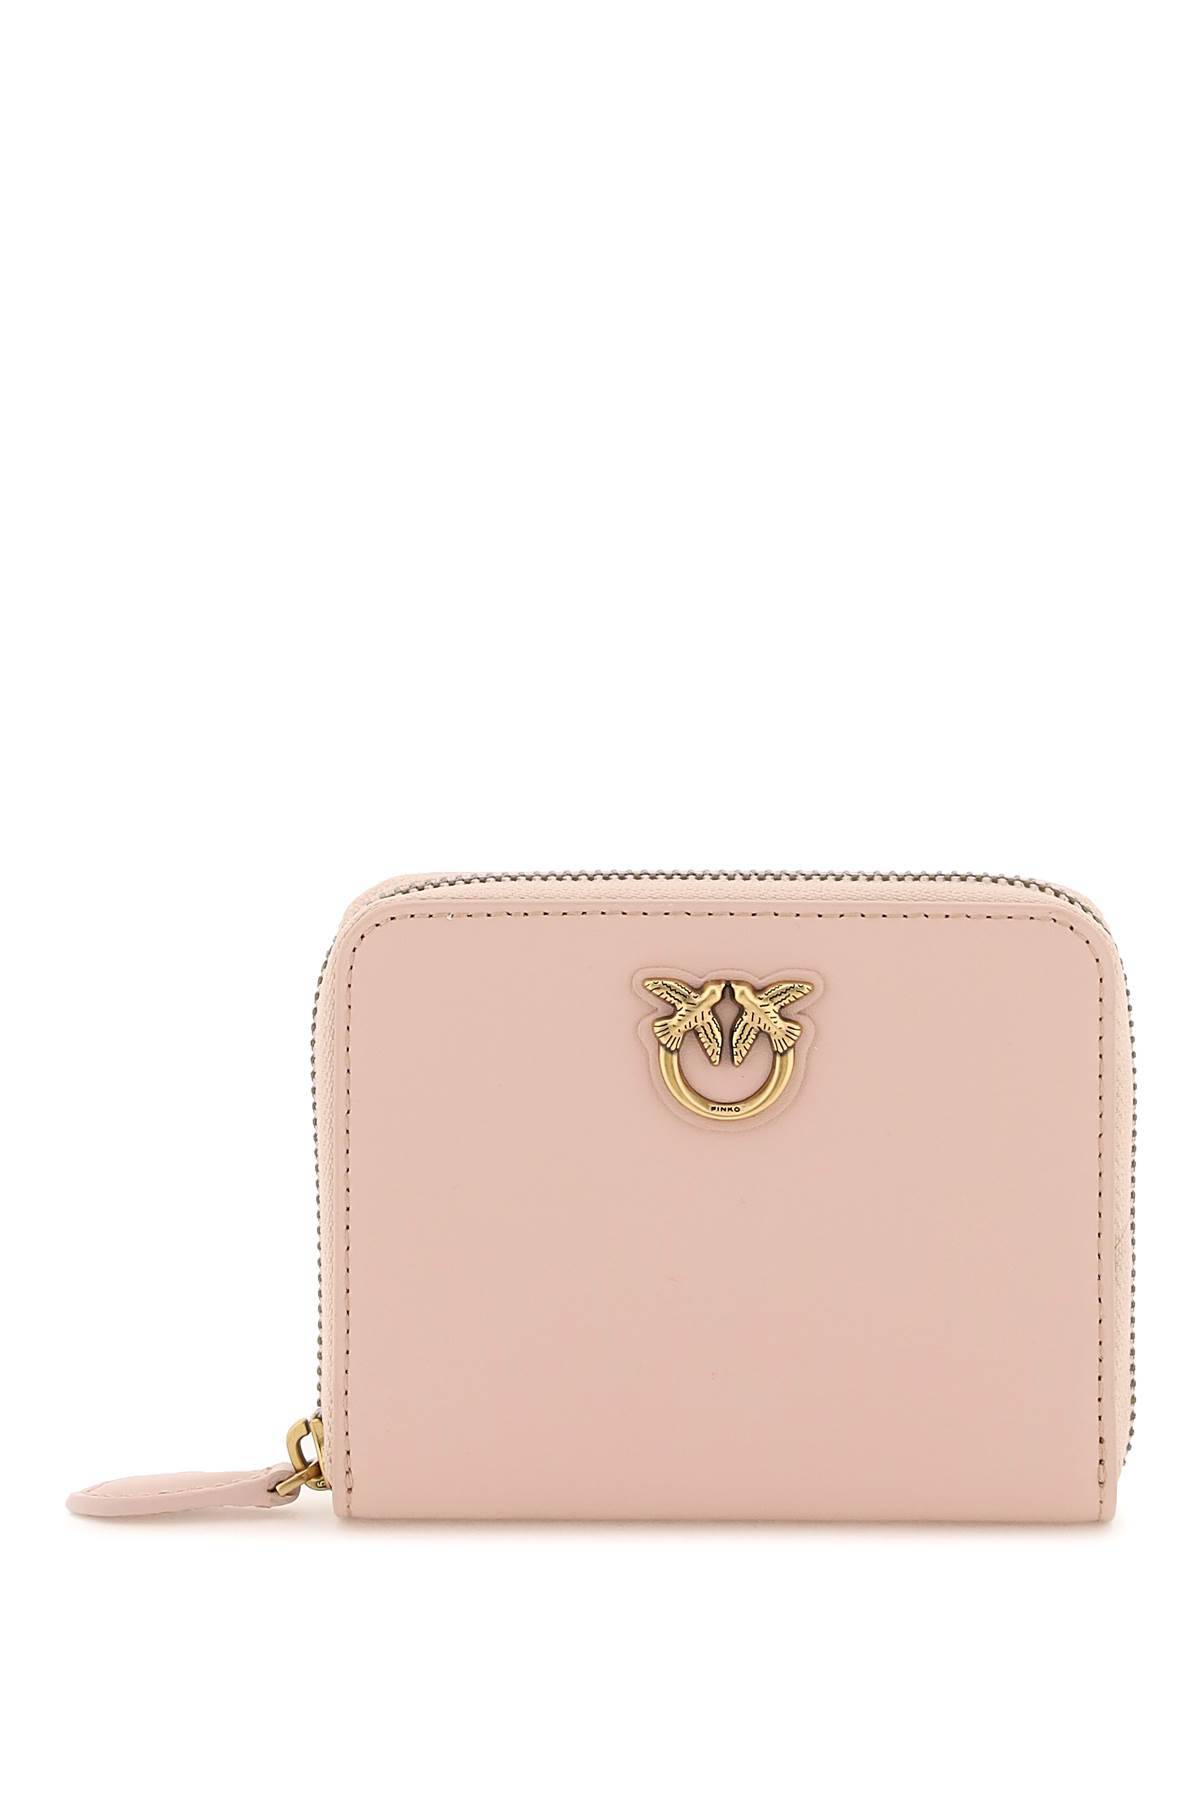 Pinko Square Leather Zip-around Purse In Pink